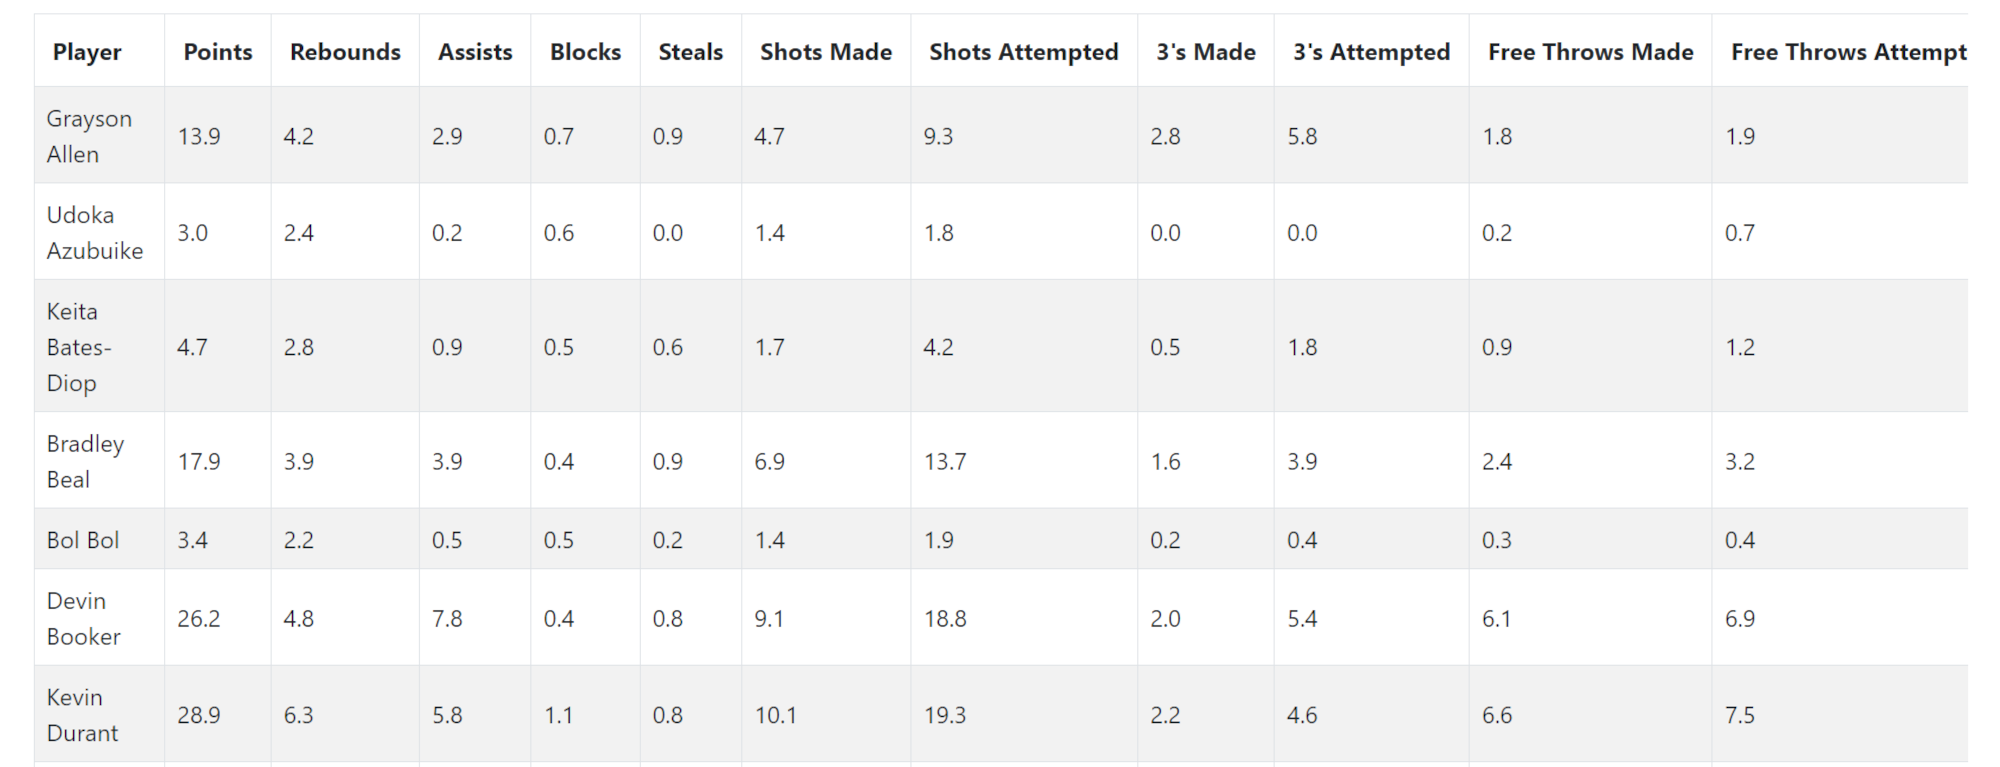 A screenshot of a data table from the Cappers NBA player stats page